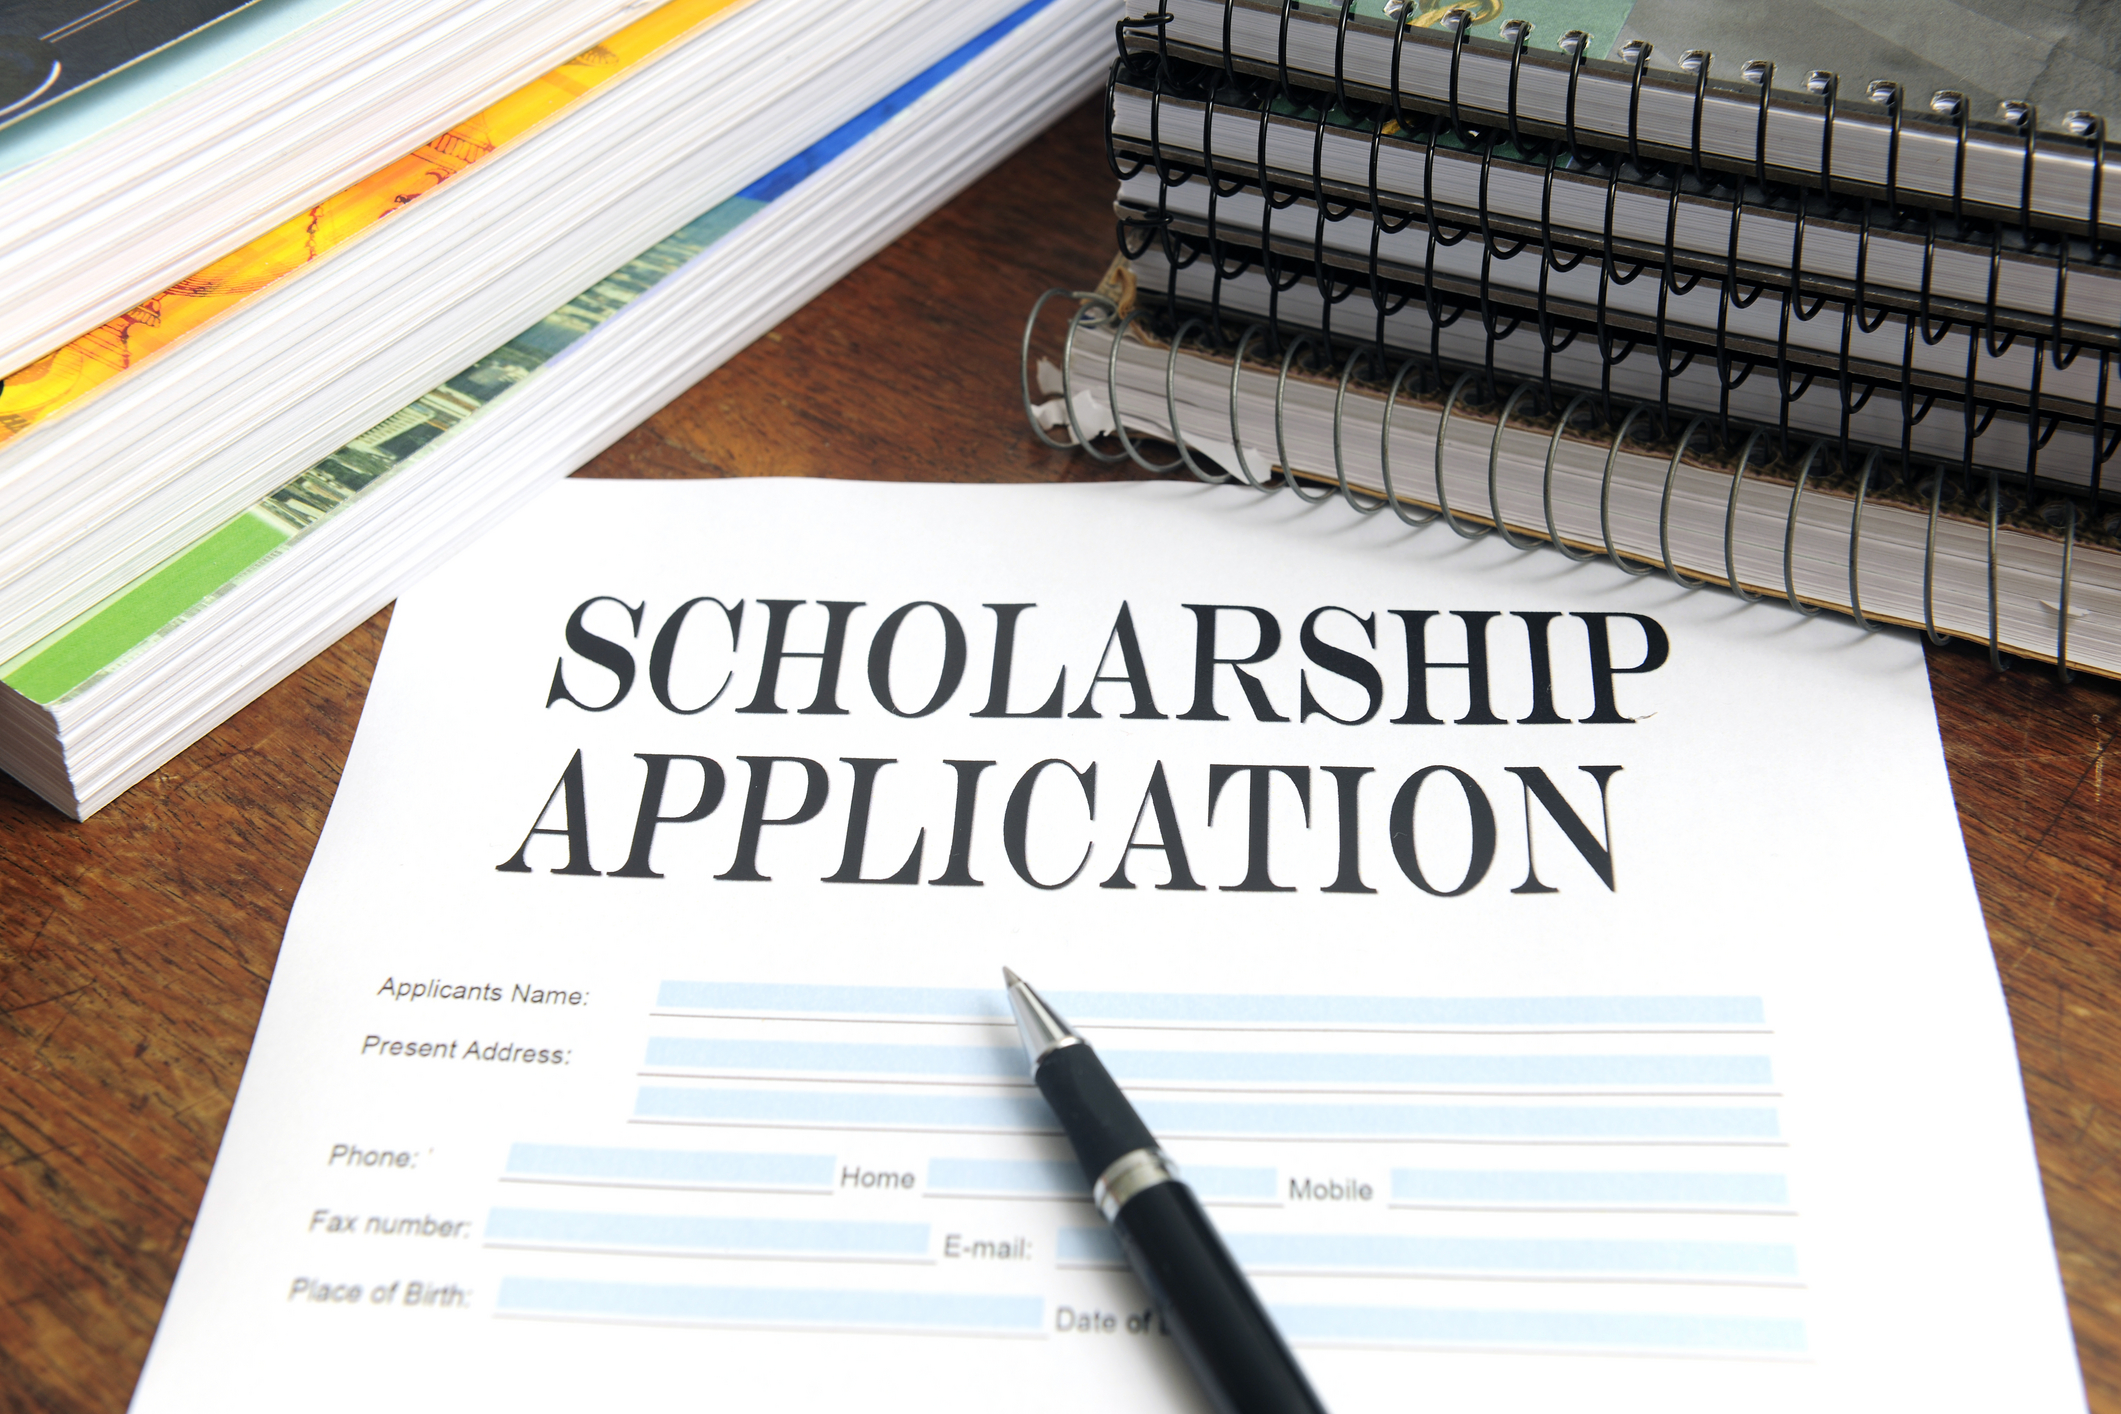 More than $2 billion in private scholarships are available each year to deserving students for filling out some paperwork, writing an essay or two and occasionally being interviewed in person or over the phone. Copyright: Mangostock | Dreamstime.com